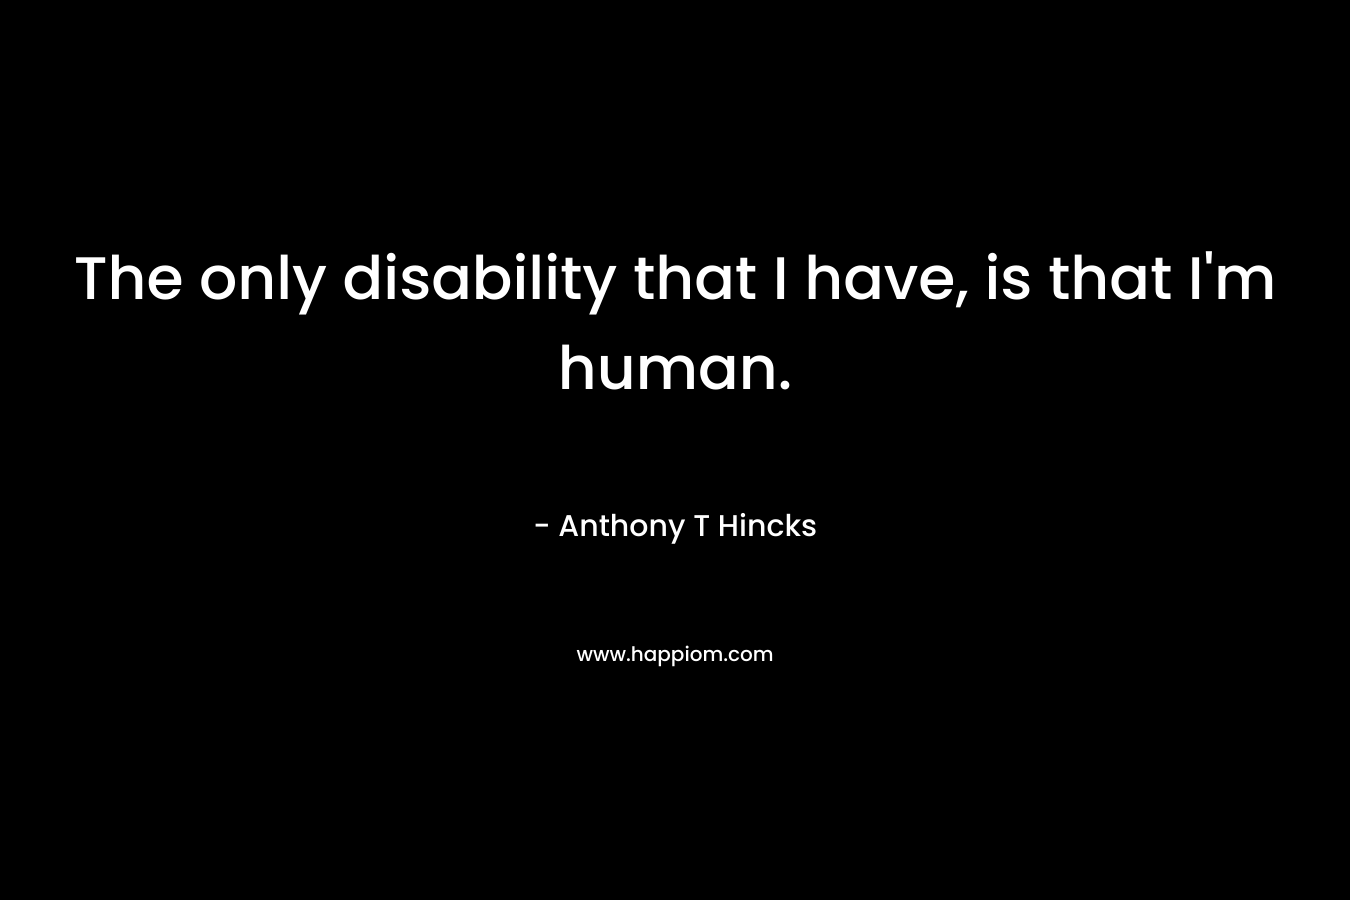 The only disability that I have, is that I’m human. – Anthony T Hincks